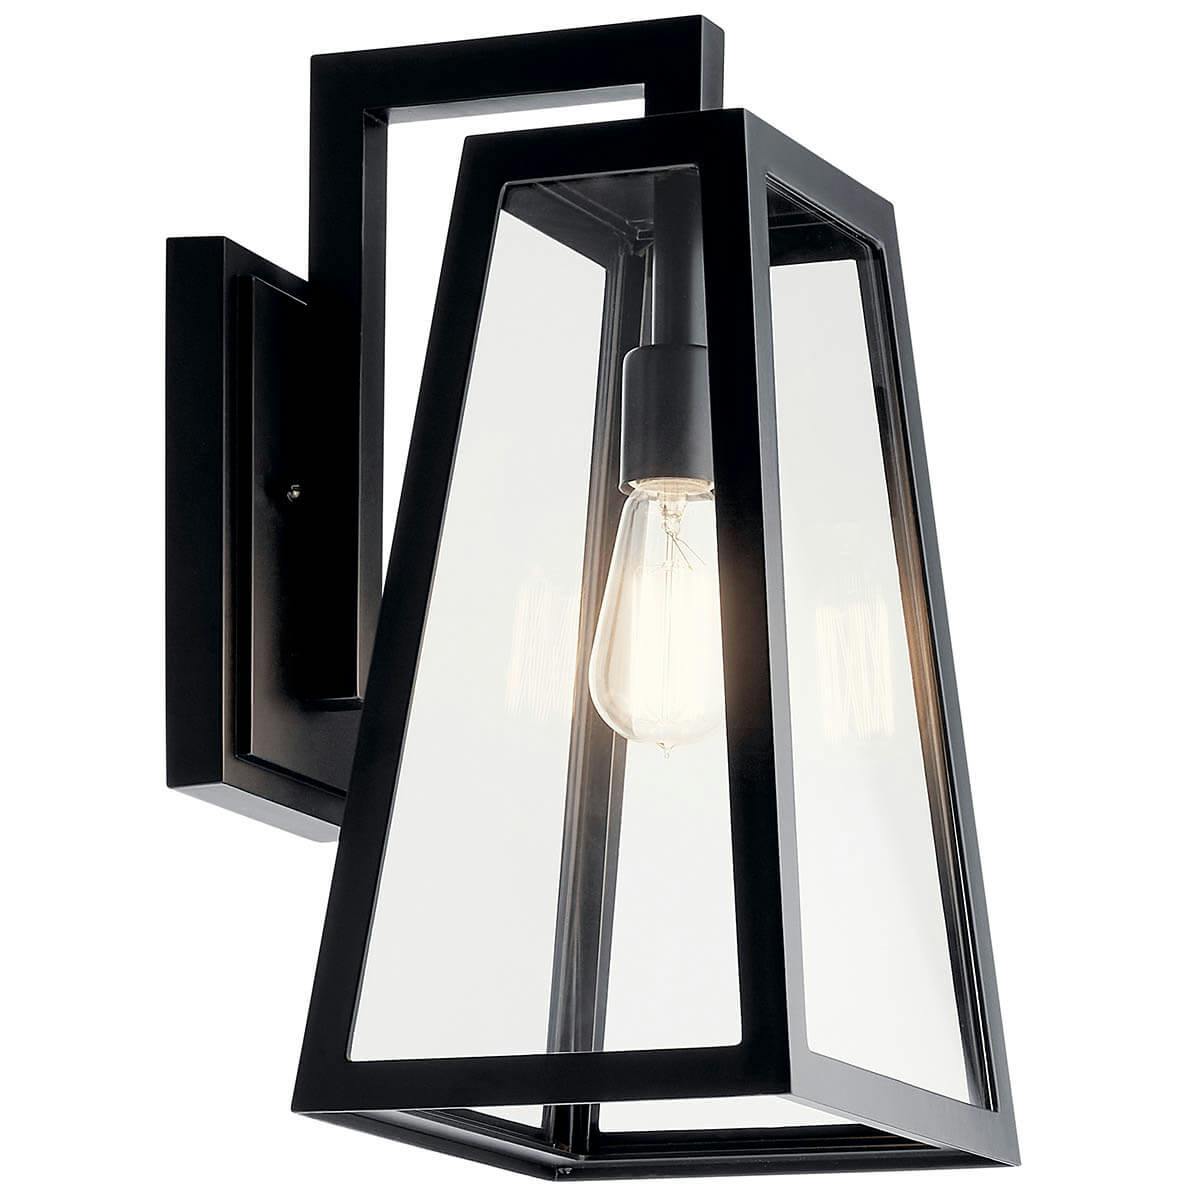 The Delison 16.75 " 1 Light Wall Light Black on a white background